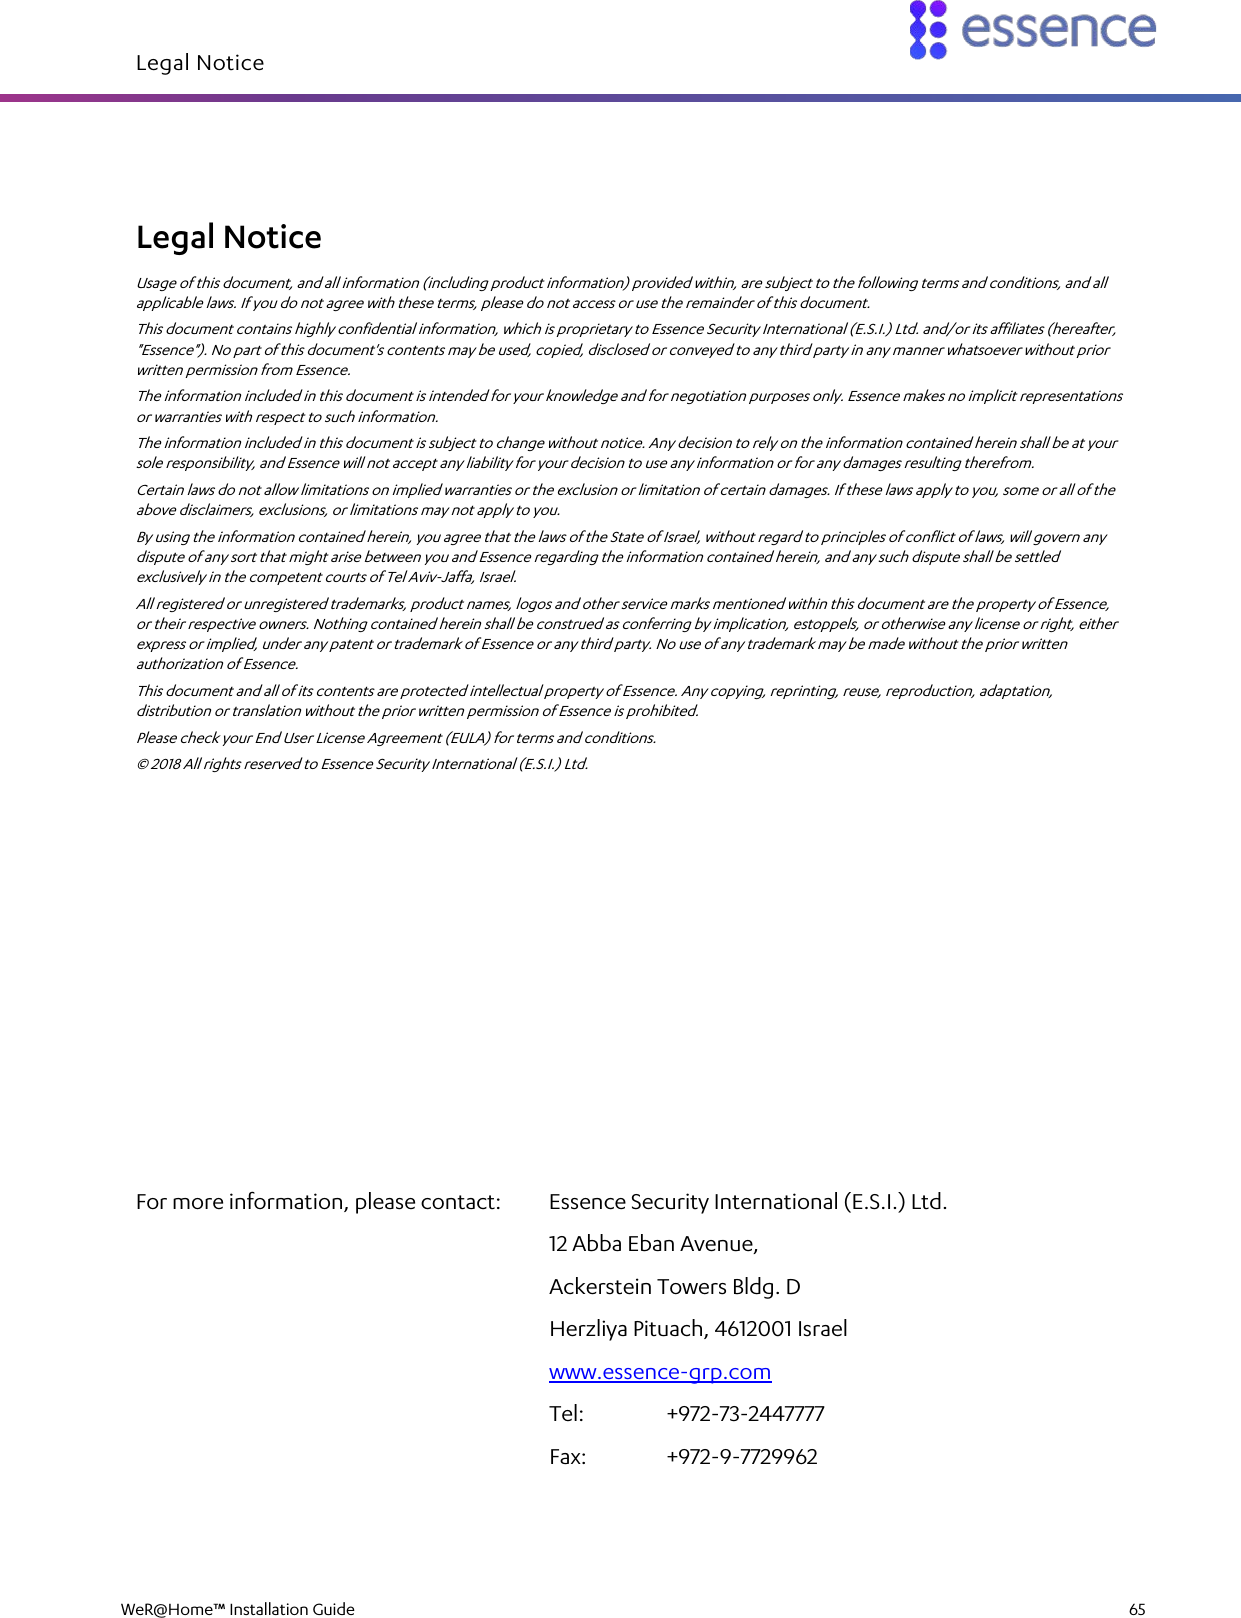 Legal Notice   WeR@Home™ Installation Guide    65  Legal Notice Usage of this document, and all information (including product information) provided within, are subject to the following terms and conditions, and all applicable laws. If you do not agree with these terms, please do not access or use the remainder of this document. This document contains highly confidential information, which is proprietary to Essence Security International (E.S.I.) Ltd. and/or its affiliates (hereafter, &quot;Essence&quot;). No part of this document&apos;s contents may be used, copied, disclosed or conveyed to any third party in any manner whatsoever without prior written permission from Essence. The information included in this document is intended for your knowledge and for negotiation purposes only. Essence makes no implicit representations or warranties with respect to such information. The information included in this document is subject to change without notice. Any decision to rely on the information contained herein shall be at your sole responsibility, and Essence will not accept any liability for your decision to use any information or for any damages resulting therefrom. Certain laws do not allow limitations on implied warranties or the exclusion or limitation of certain damages. If these laws apply to you, some or all of the above disclaimers, exclusions, or limitations may not apply to you. By using the information contained herein, you agree that the laws of the State of Israel, without regard to principles of conflict of laws, will govern any dispute of any sort that might arise between you and Essence regarding the information contained herein, and any such dispute shall be settled exclusively in the competent courts of Tel Aviv-Jaffa, Israel. All registered or unregistered trademarks, product names, logos and other service marks mentioned within this document are the property of Essence, or their respective owners. Nothing contained herein shall be construed as conferring by implication, estoppels, or otherwise any license or right, either express or implied, under any patent or trademark of Essence or any third party. No use of any trademark may be made without the prior written authorization of Essence. This document and all of its contents are protected intellectual property of Essence. Any copying, reprinting, reuse, reproduction, adaptation, distribution or translation without the prior written permission of Essence is prohibited. Please check your End User License Agreement (EULA) for terms and conditions. © 2018 All rights reserved to Essence Security International (E.S.I.) Ltd.         For more information, please contact:  Essence Security International (E.S.I.) Ltd. 12 Abba Eban Avenue, Ackerstein Towers Bldg. D Herzliya Pituach, 4612001 Israel www.essence-grp.com Tel:    +972-73-2447777 Fax:    +972-9-7729962  